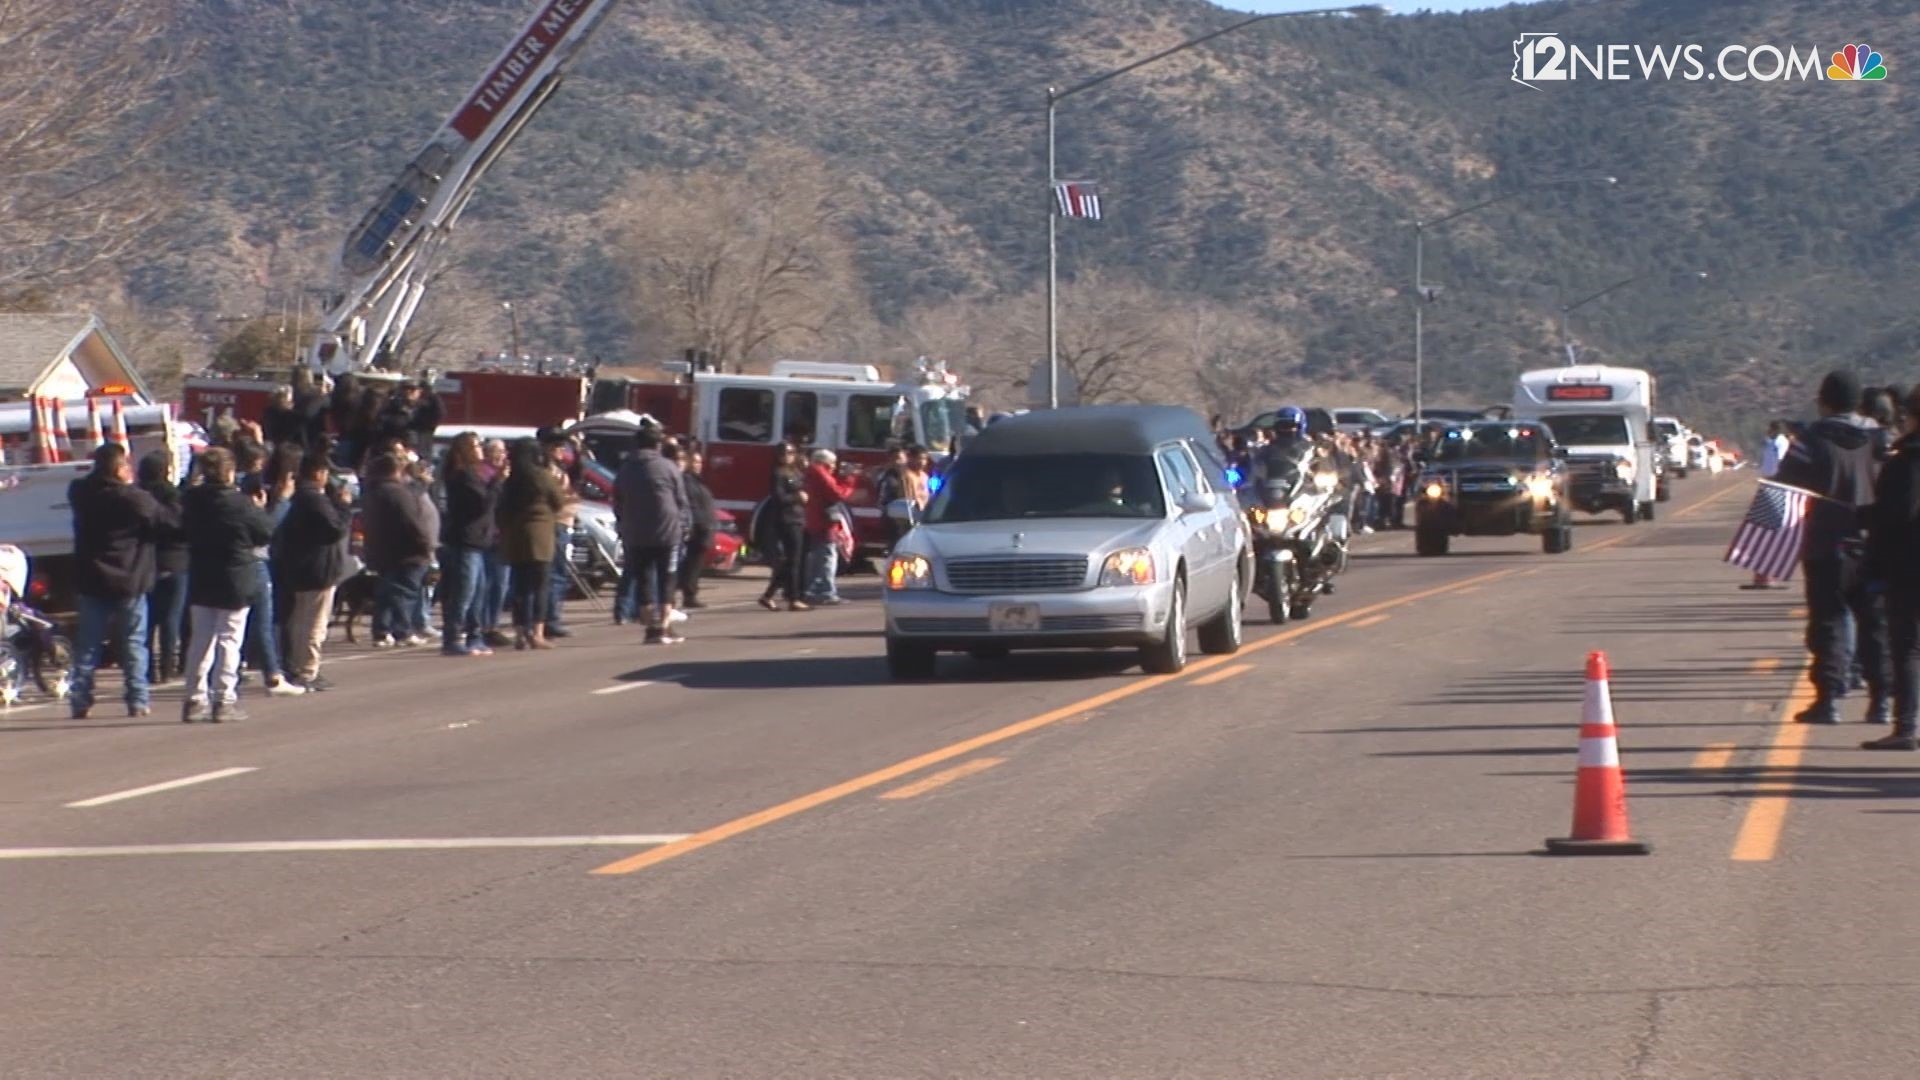 Officer David Kellywood died on Feb. 17, 2020. A procession brought his body to Whiteriver on Thursday. He was called "a fine officer and a genuine man of character.